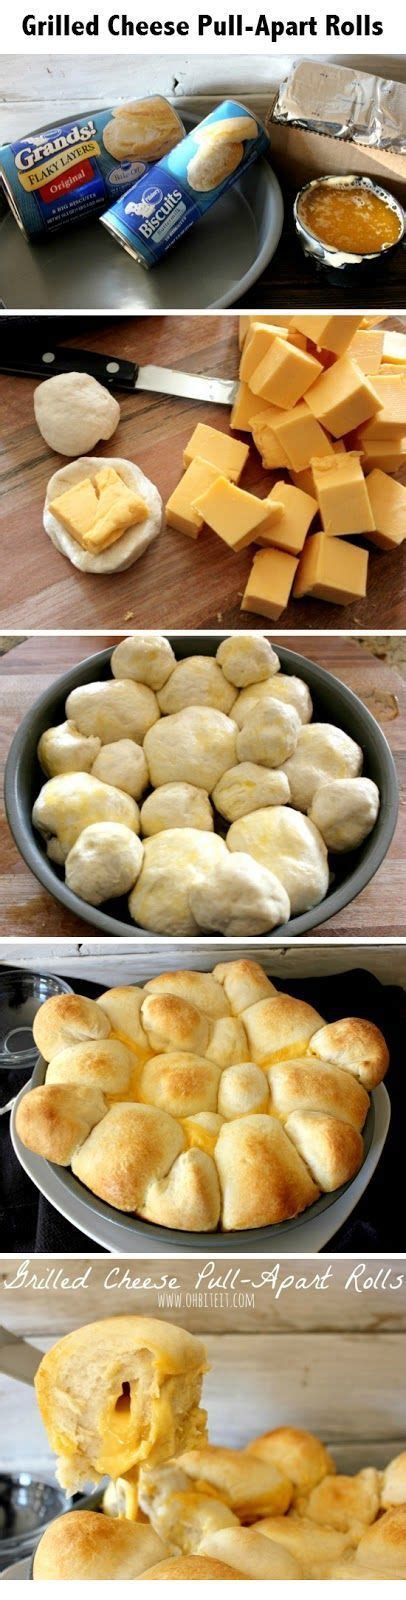 biscuits recipes quick easy  delicious bread sides